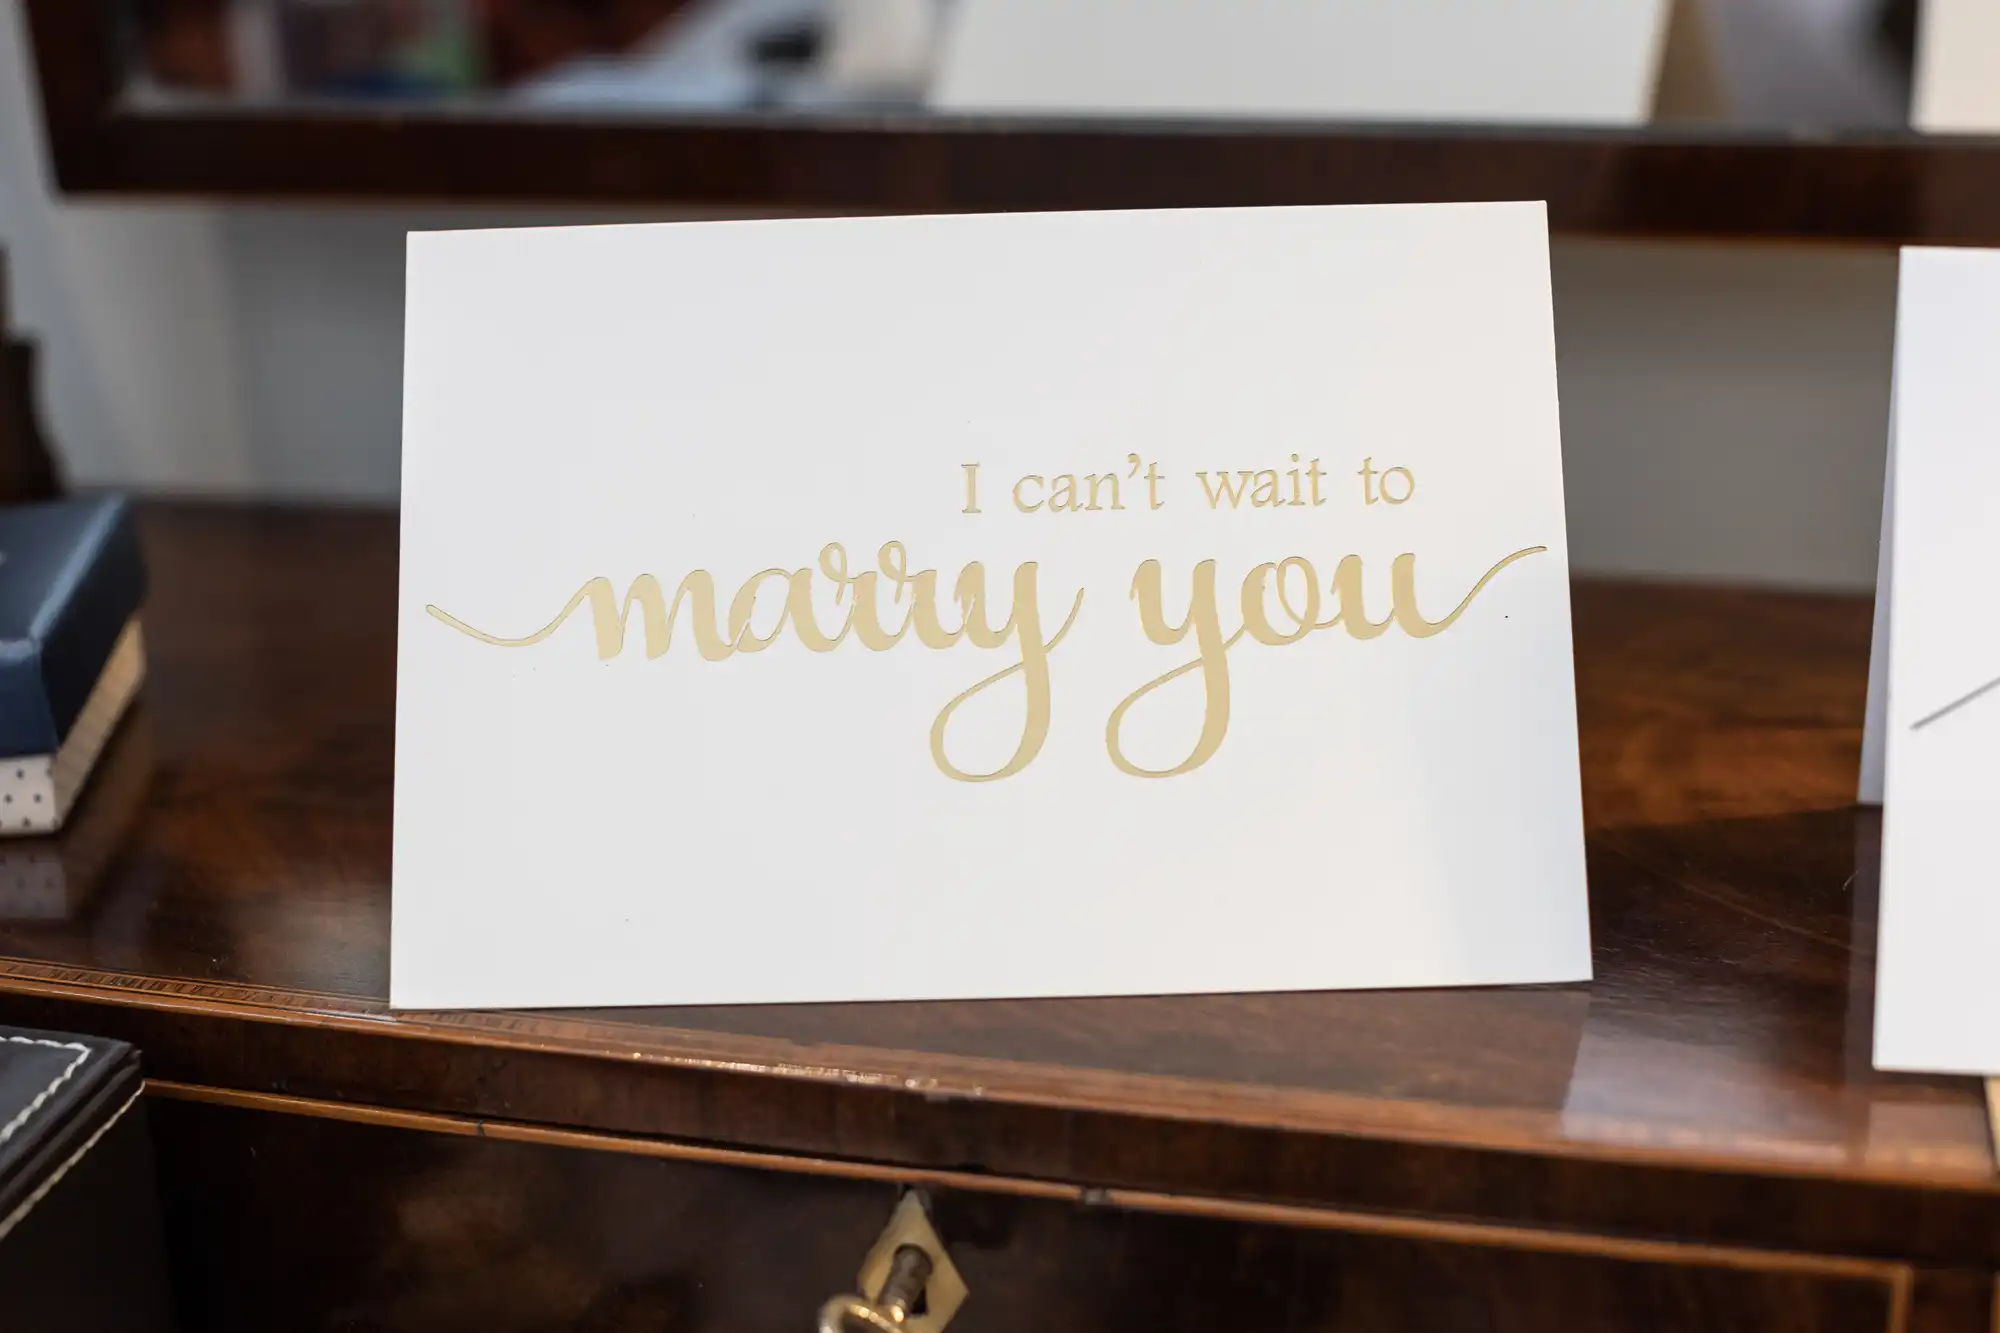 A card with gold cursive writing that says "I can't wait to marry you," placed on a wooden desk.